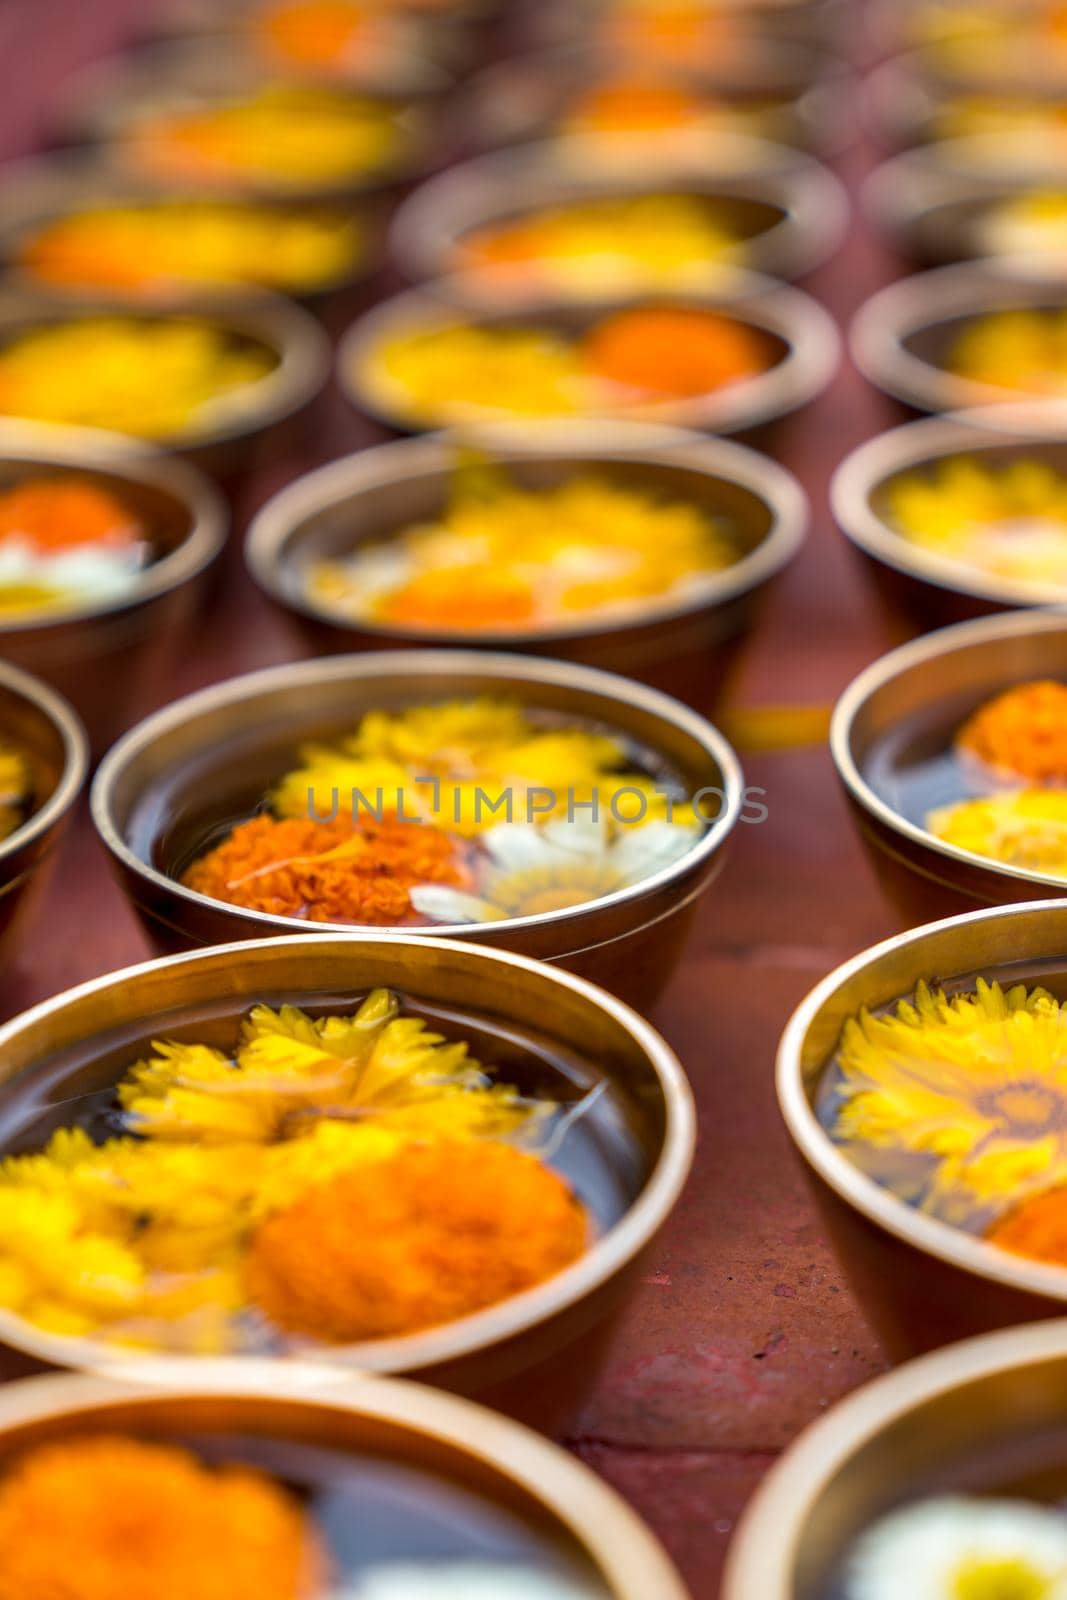 Buddhist flower offerings or gifts in bowls and rows. Buddhism religion offering in a temple